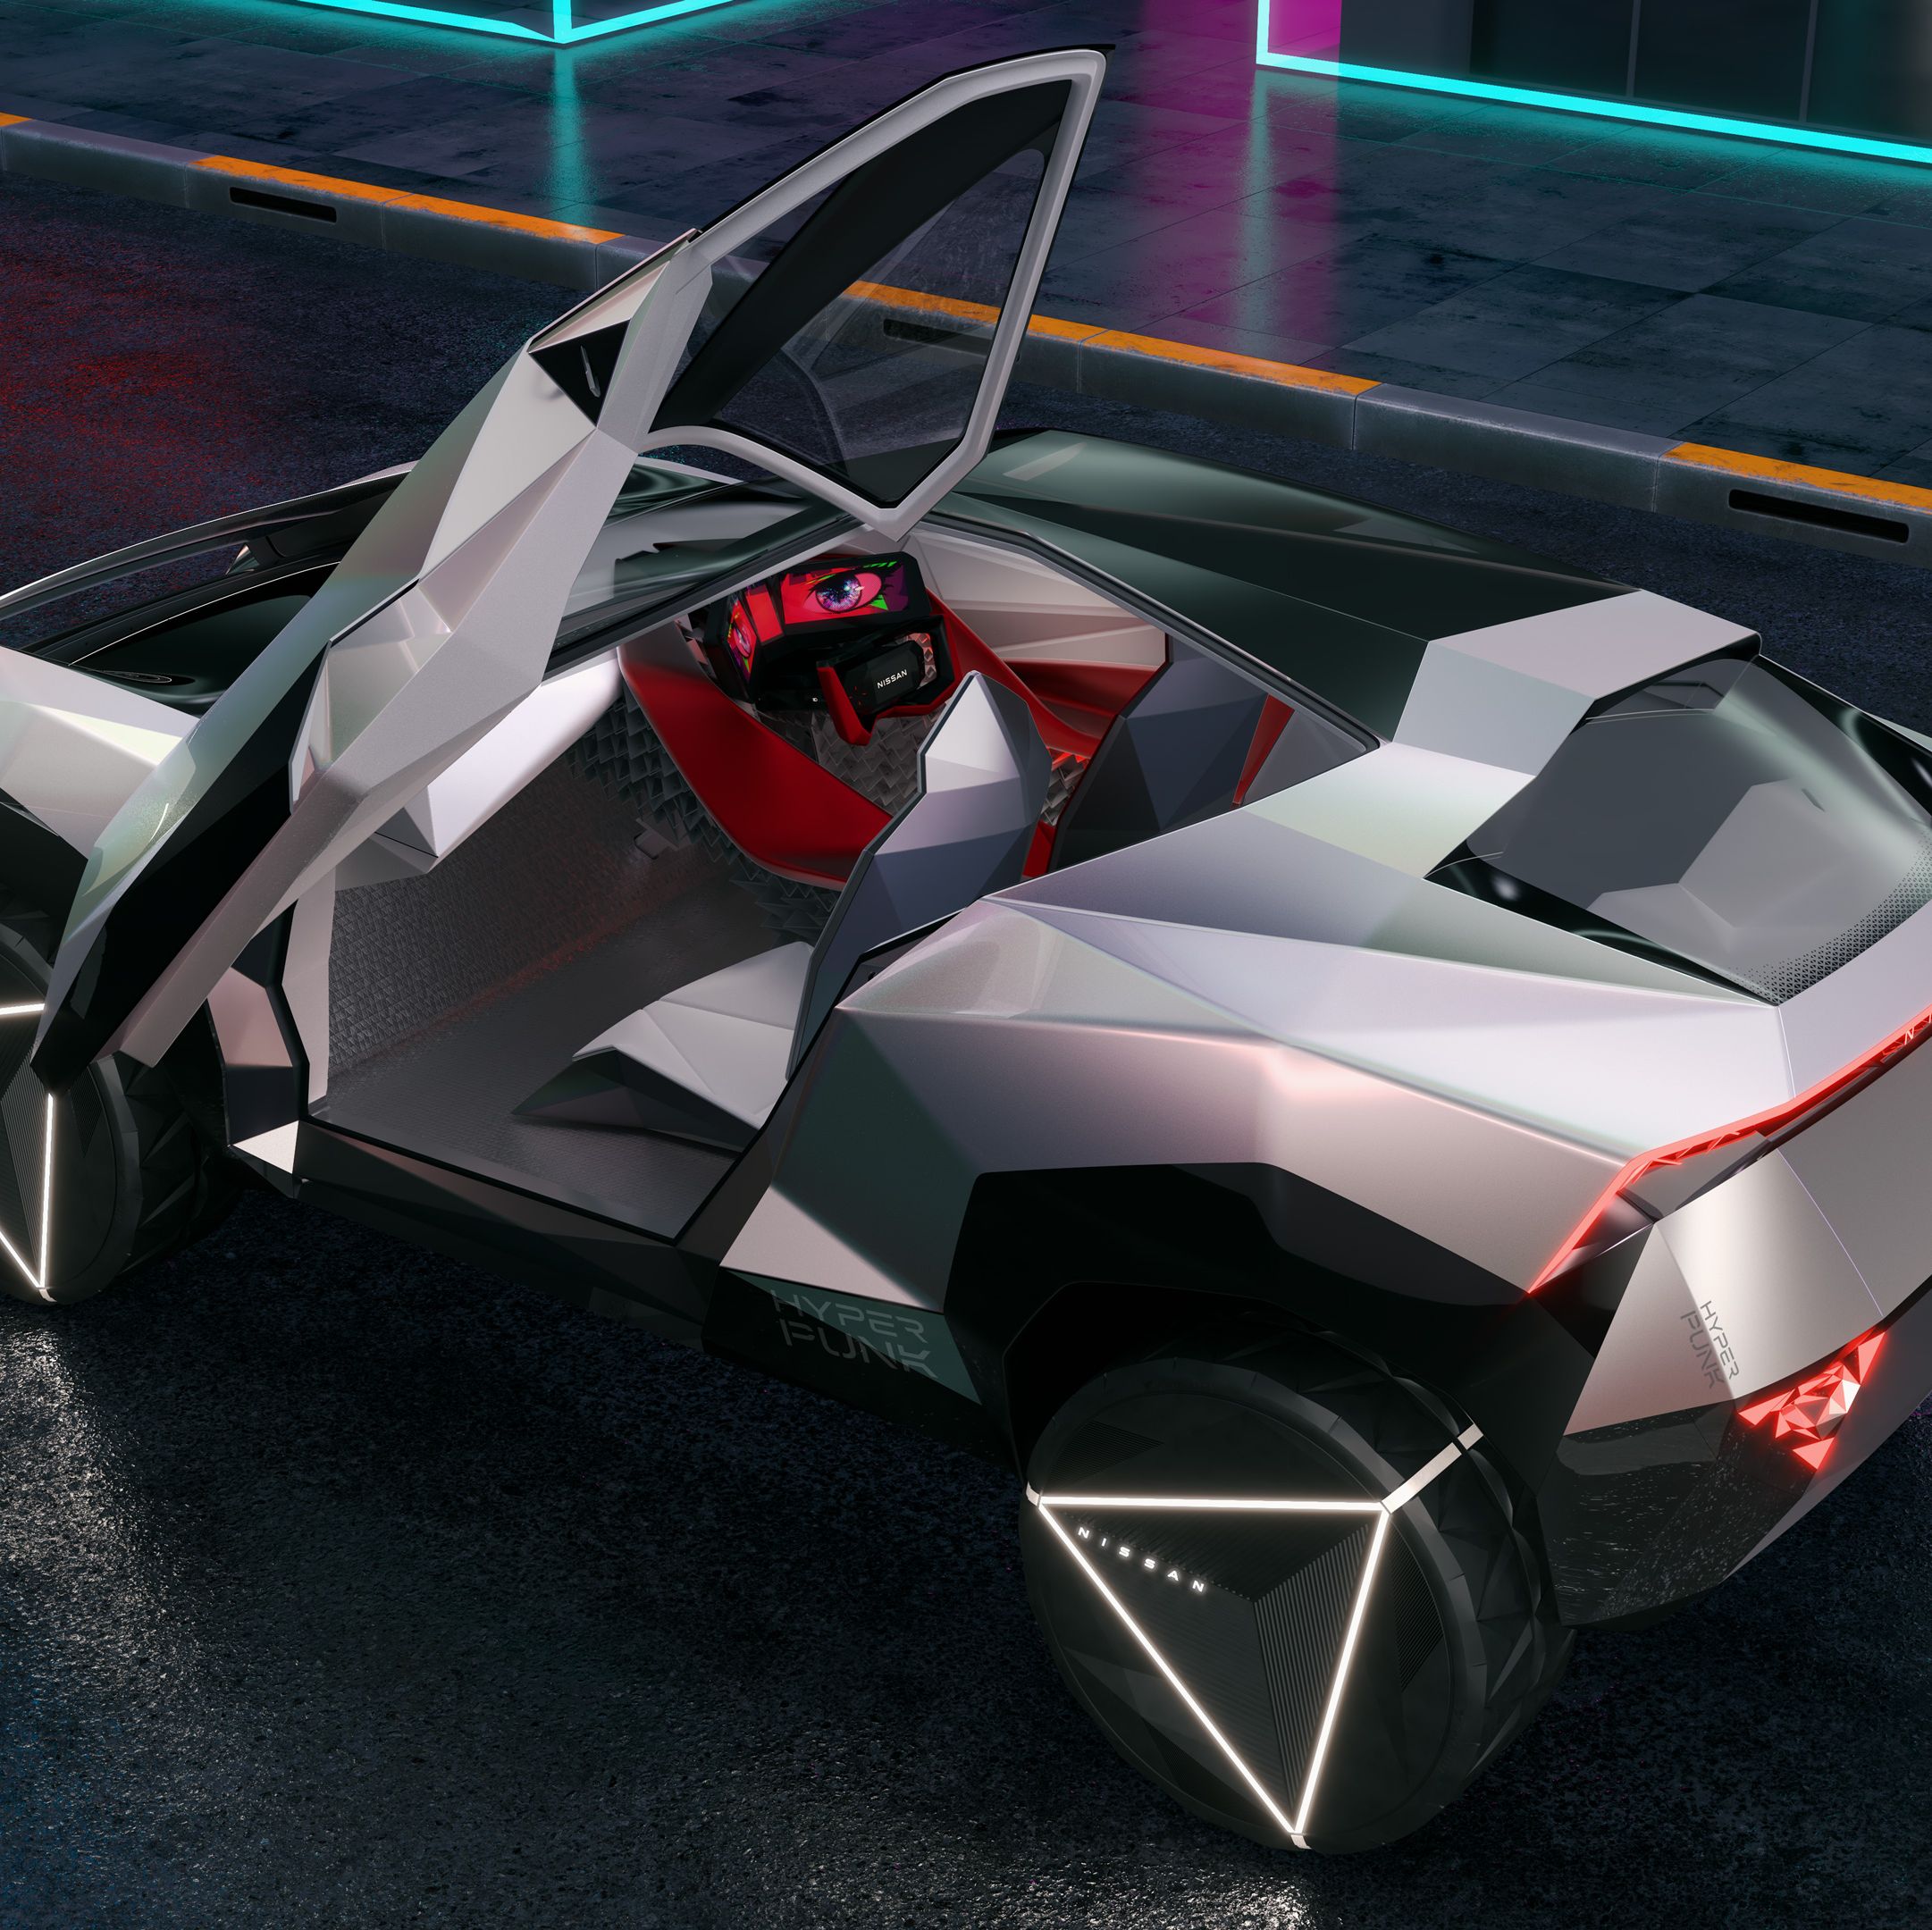 Nissan Hyper Punk to Debut in Fortnite before Real Life